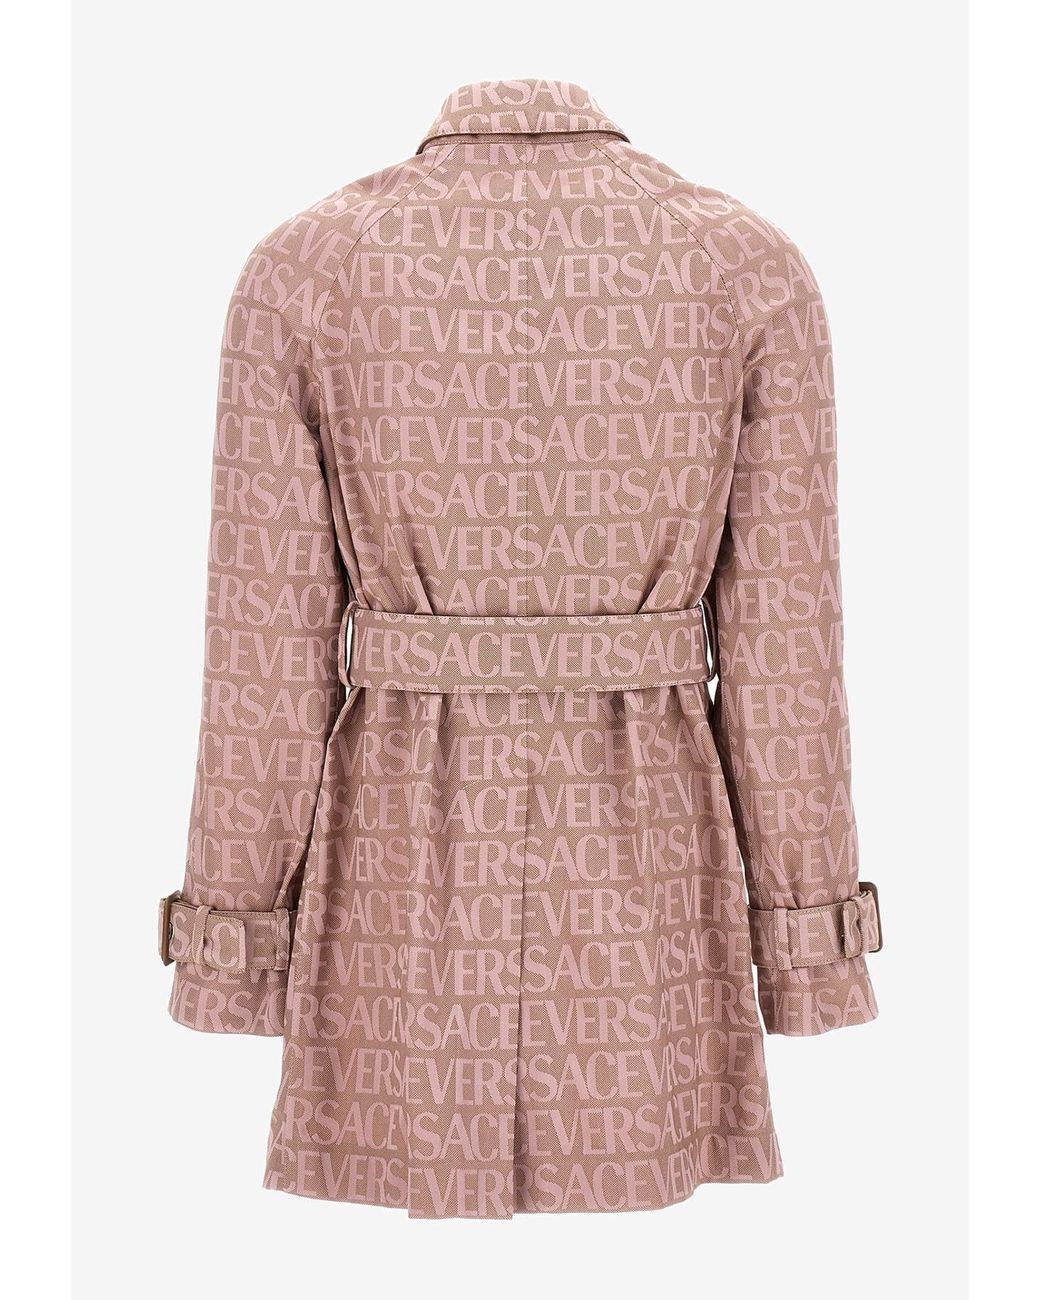 Versace Allover-jacquard Trench Coat - Brown